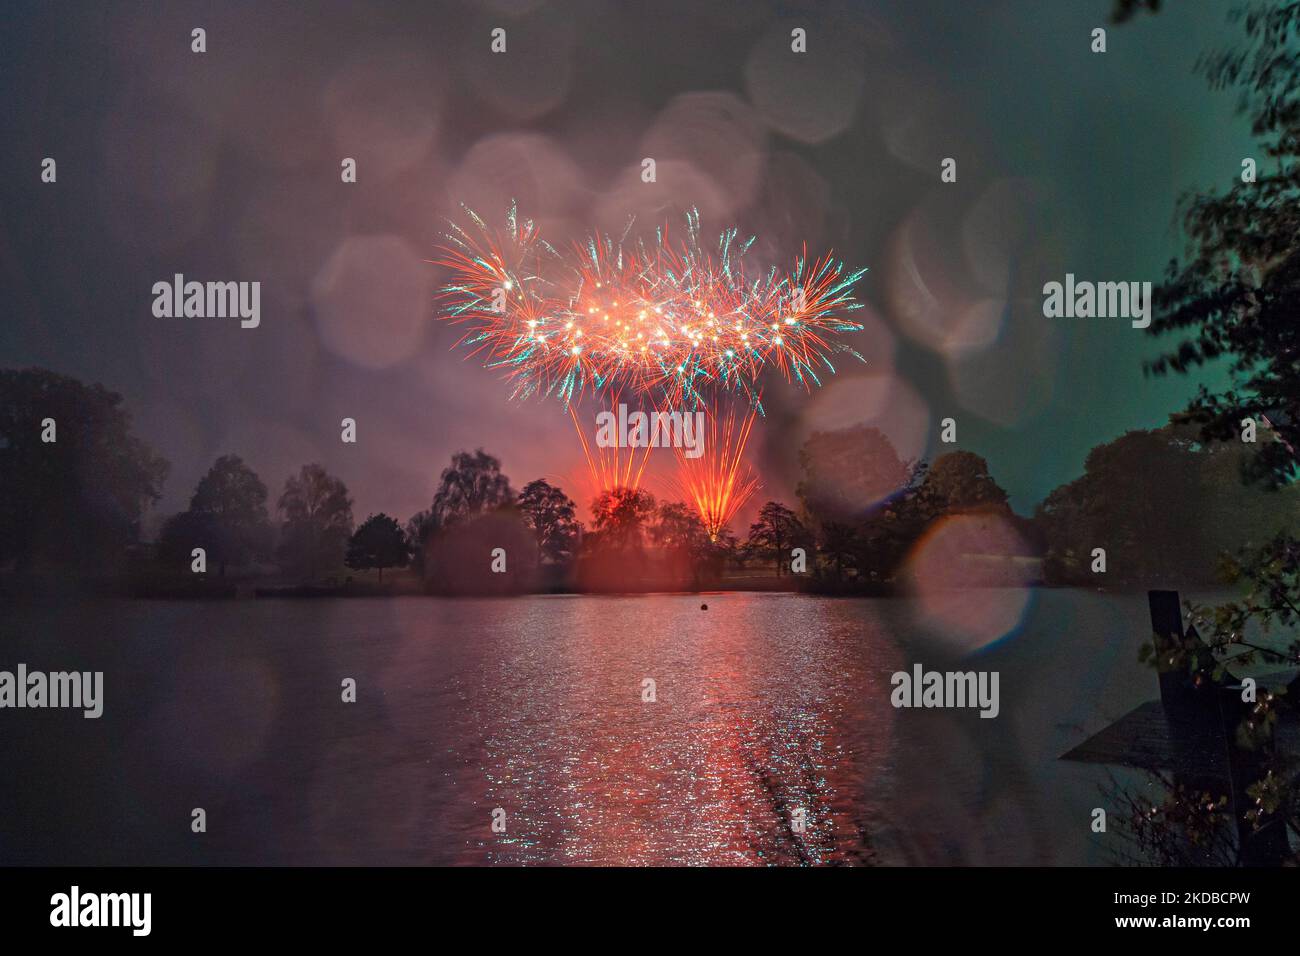 Tunbridge Wells, Kent, England. 05 November 2022. Despite all other firework shows being cancelled due to high winds and driving rain, the Round Table Charity Fireworks display in Dunorlan Park, Royal Tunbridge Wells went ahead in terrible weather. ©Sarah Mott / Alamy Live News. Stock Photo